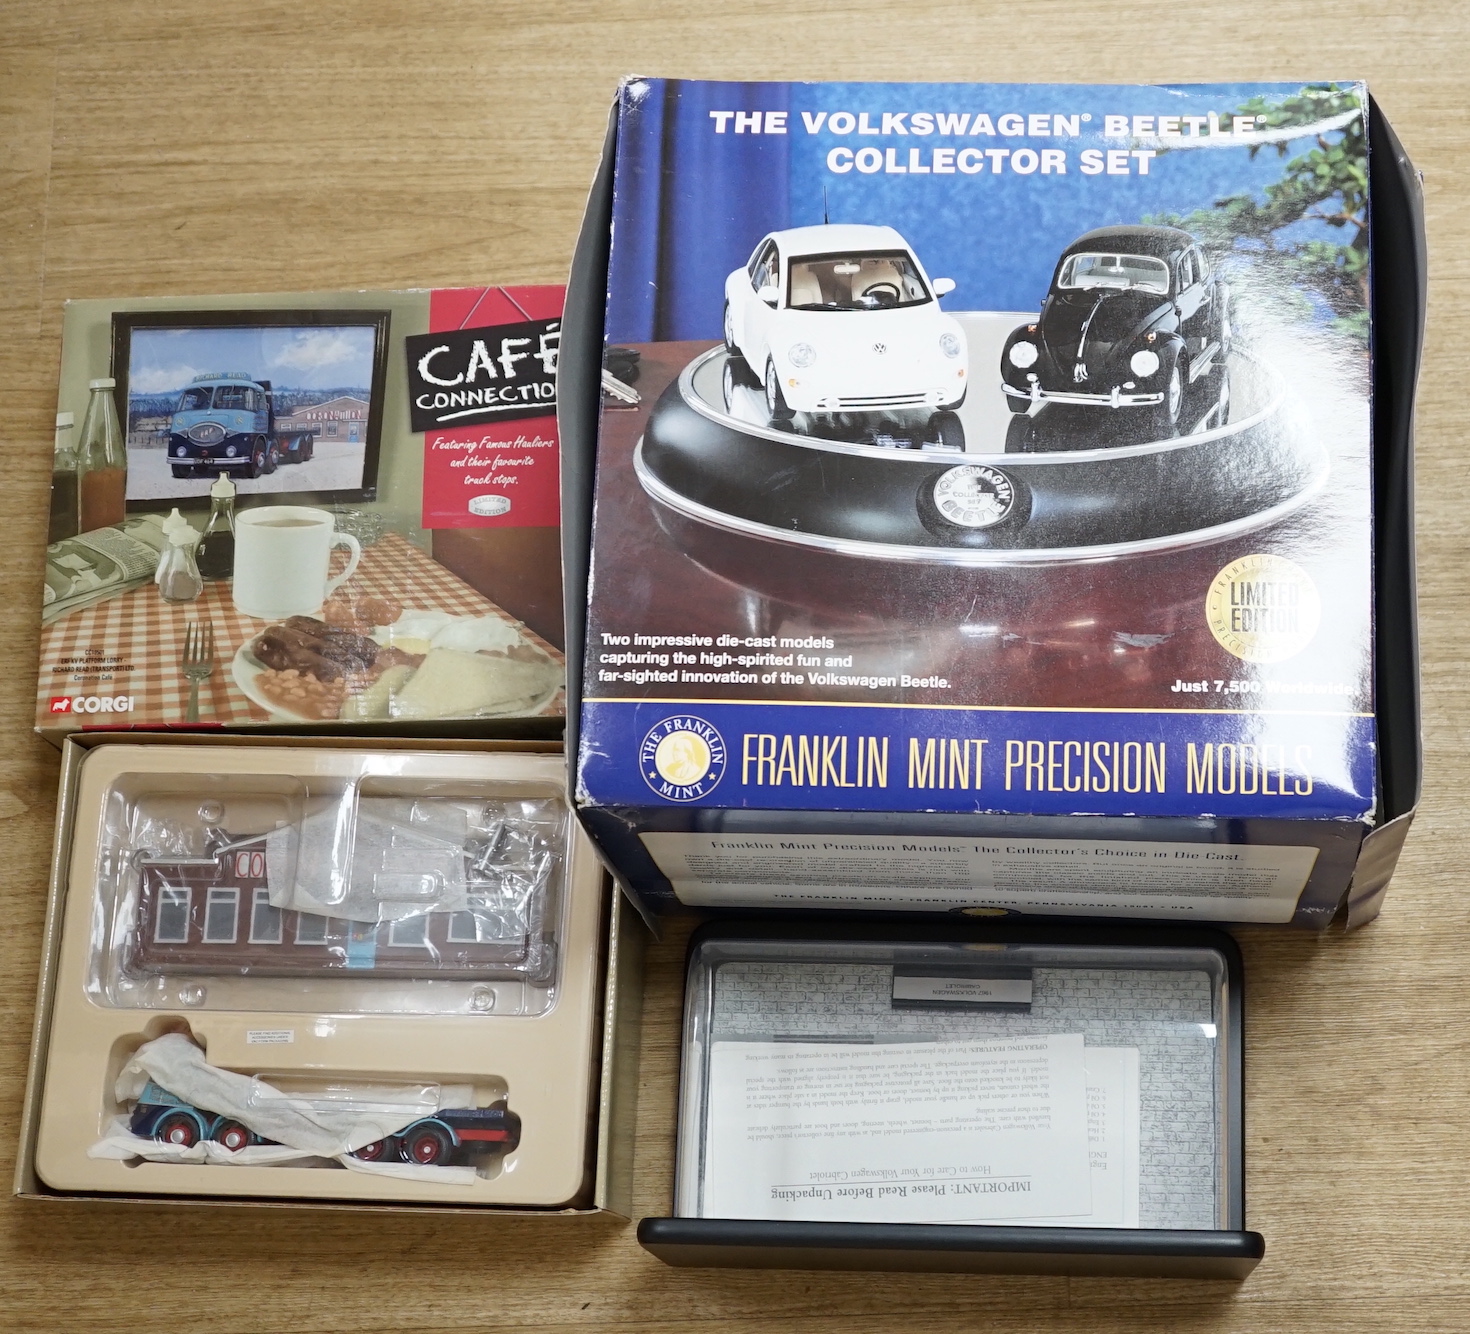 Nineteen boxed diecast commercial vehicles by Corgi Classics, Oxford Diecast, etc. and two Franklin Mint 1:24 scale Volkswagen Beetles